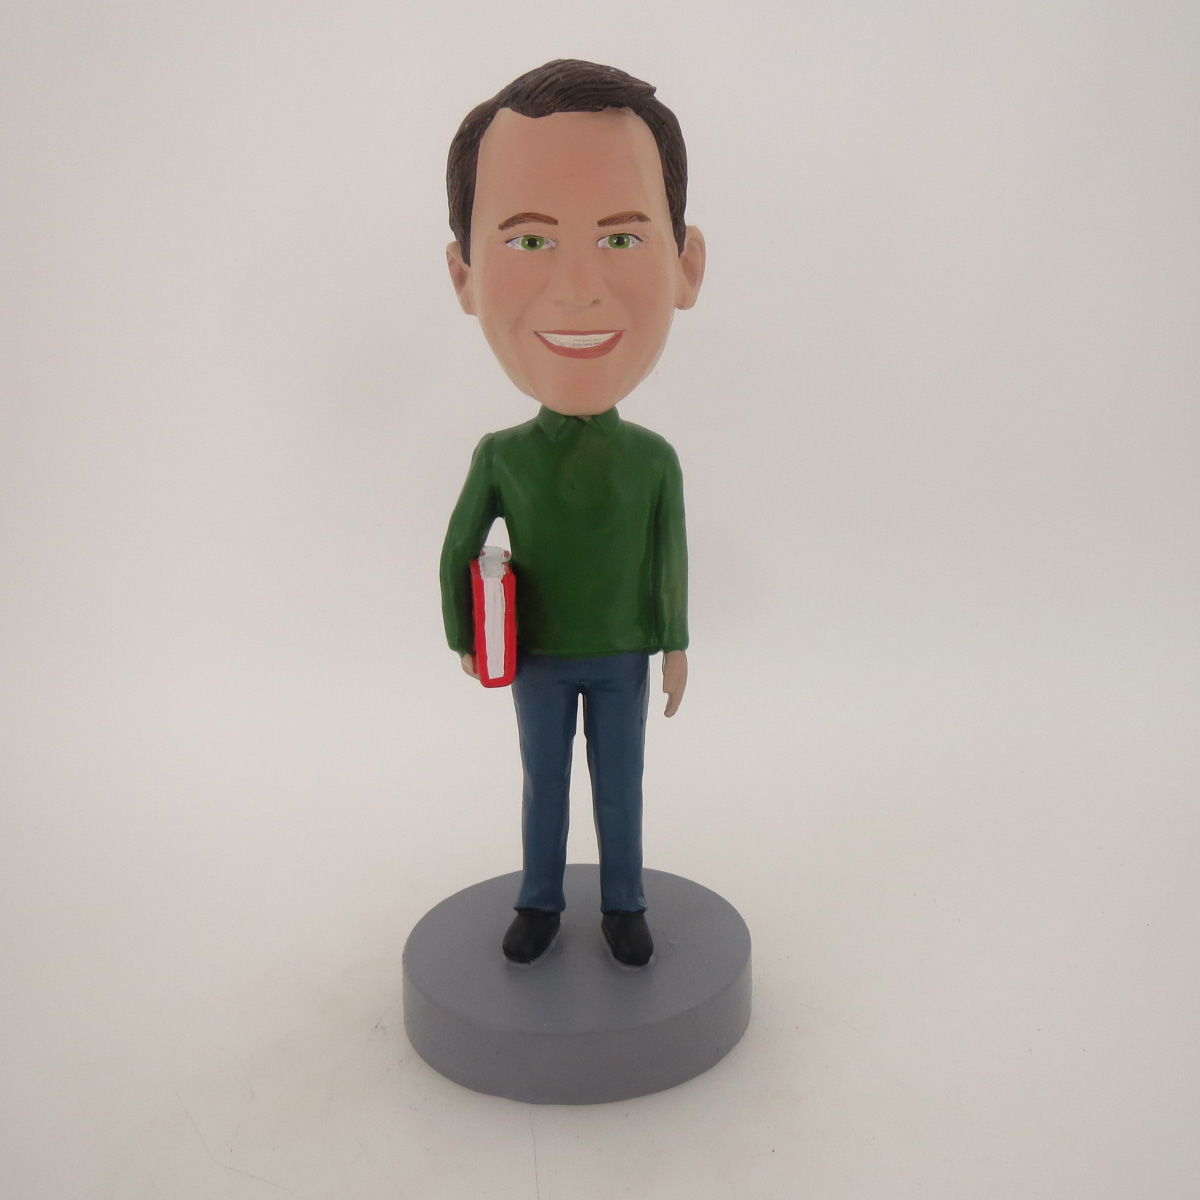 Picture of Custom Bobblehead Doll: Man Holding Big Book